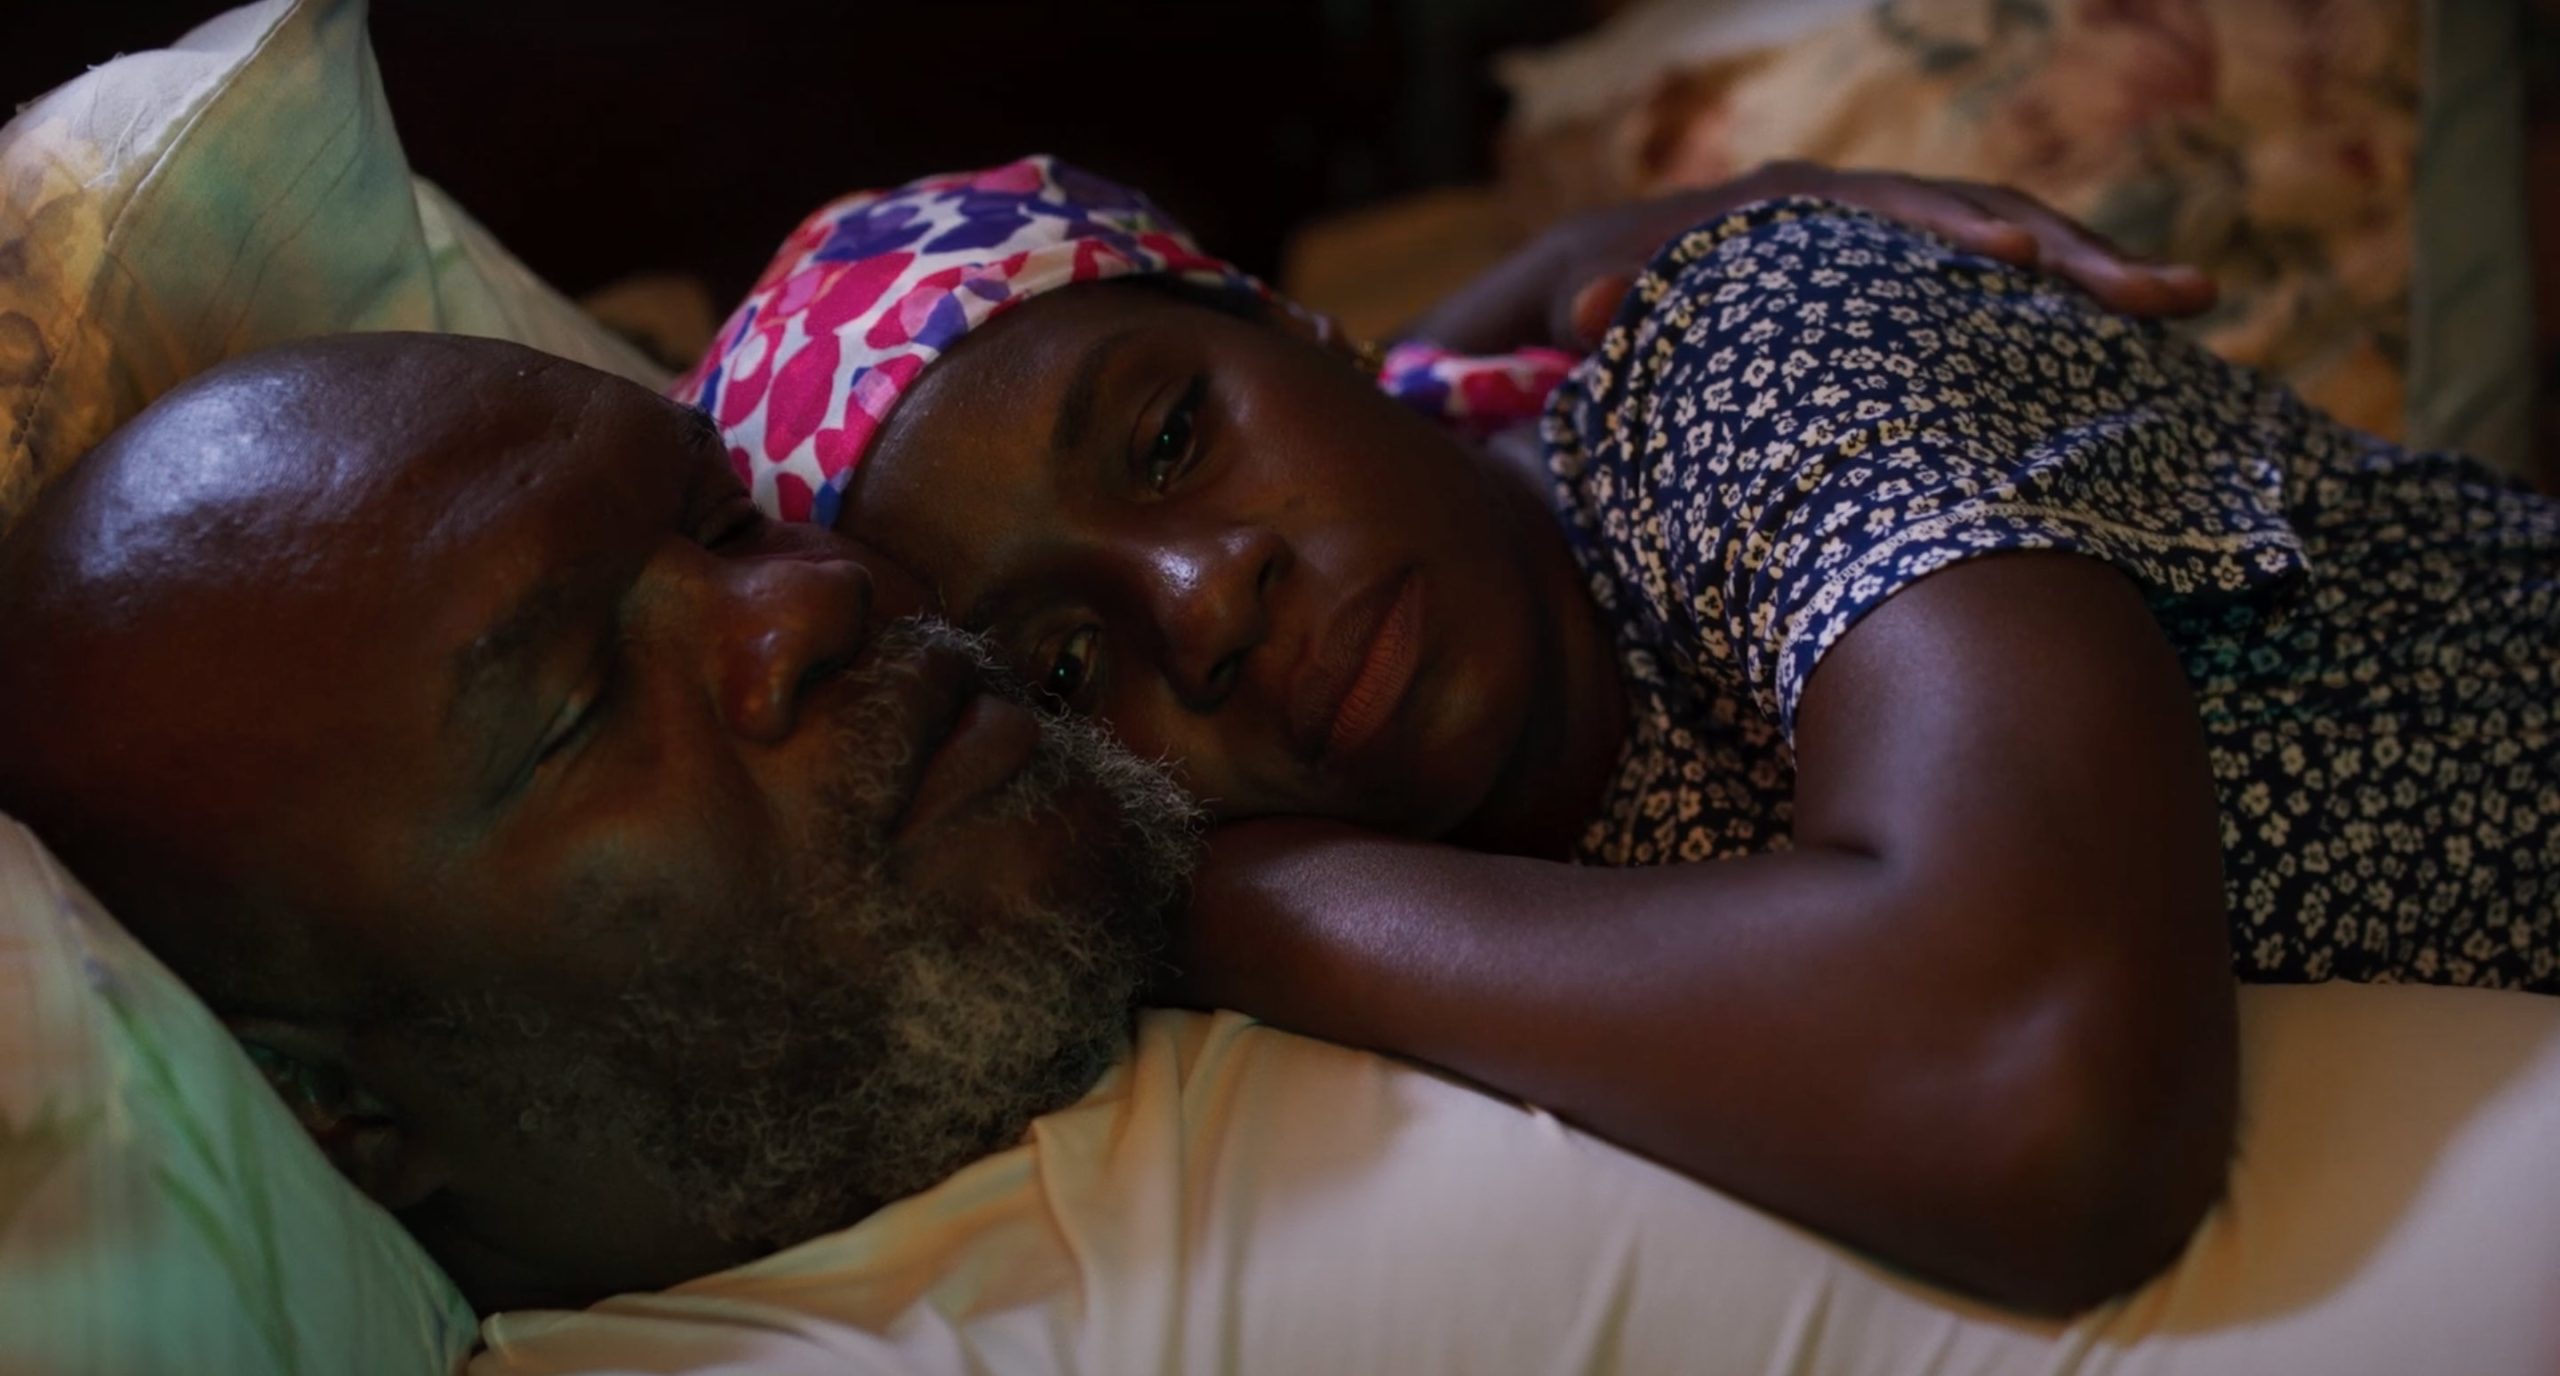 MOUNTAINS Trailer: A Haitian Immigrant Family Lives Through Change in Festival Winner